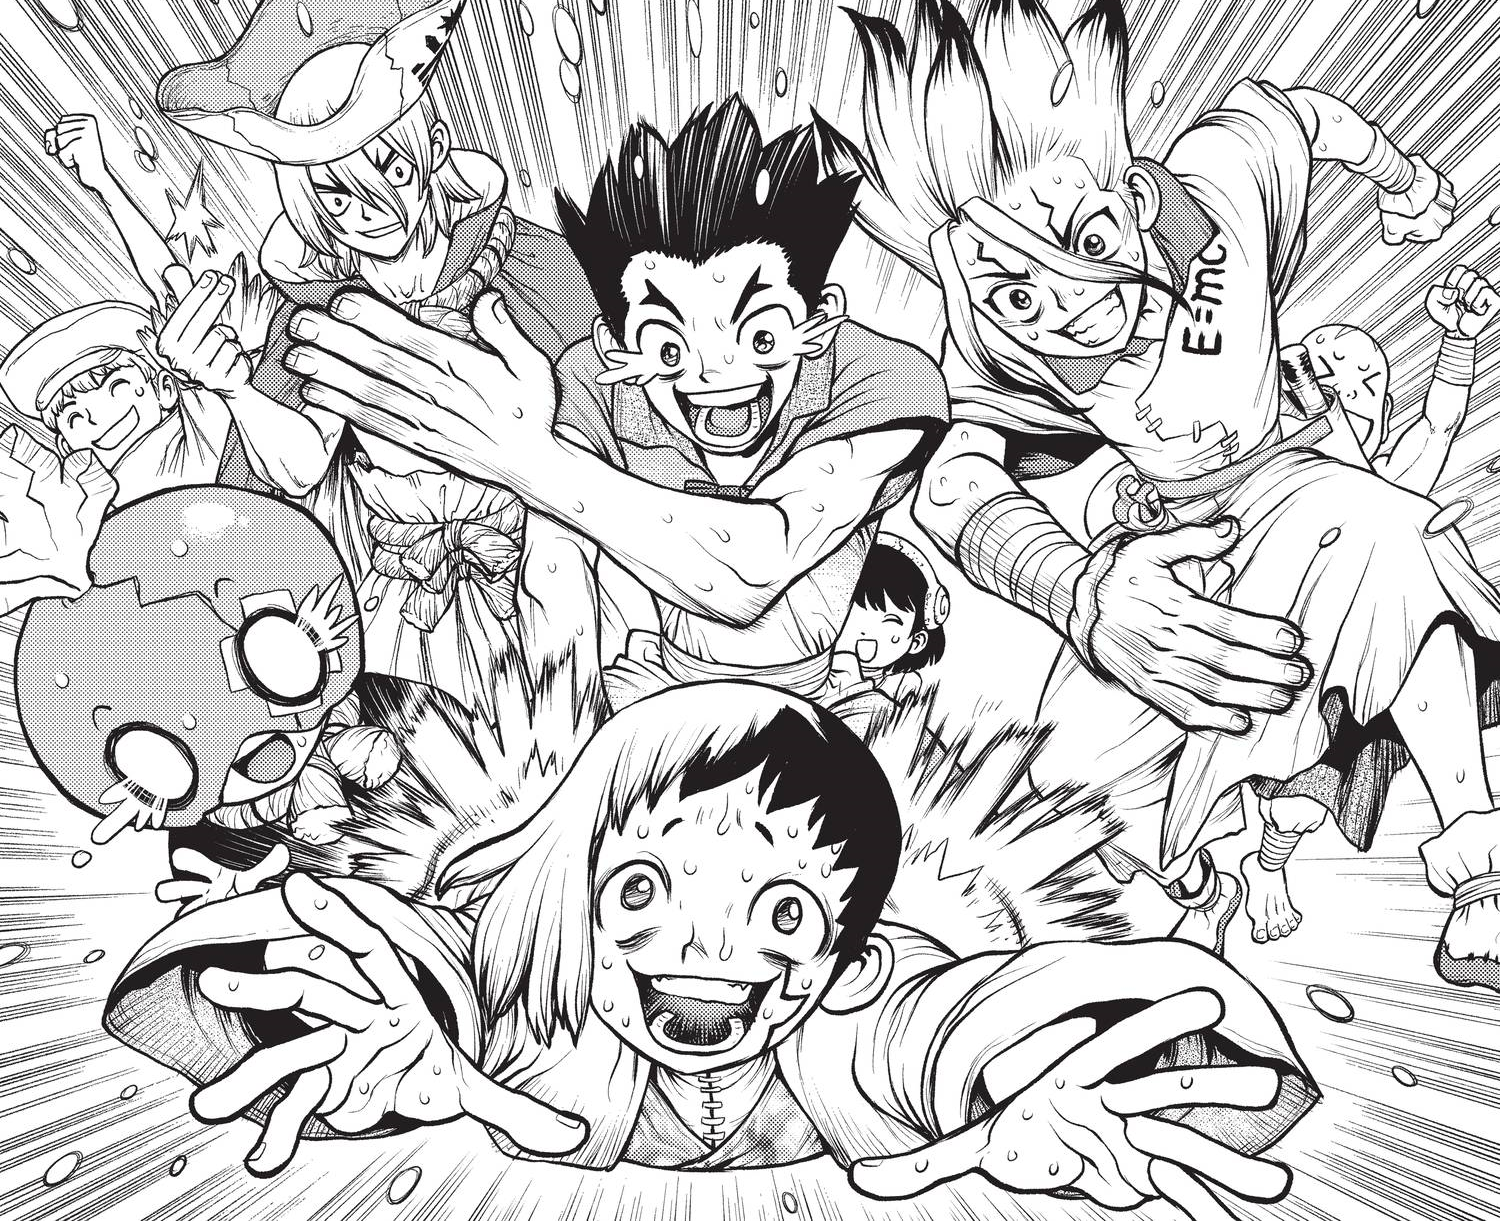 Dr. Stone Season 3 Episode 7 Link and Discussion : r/DrStone